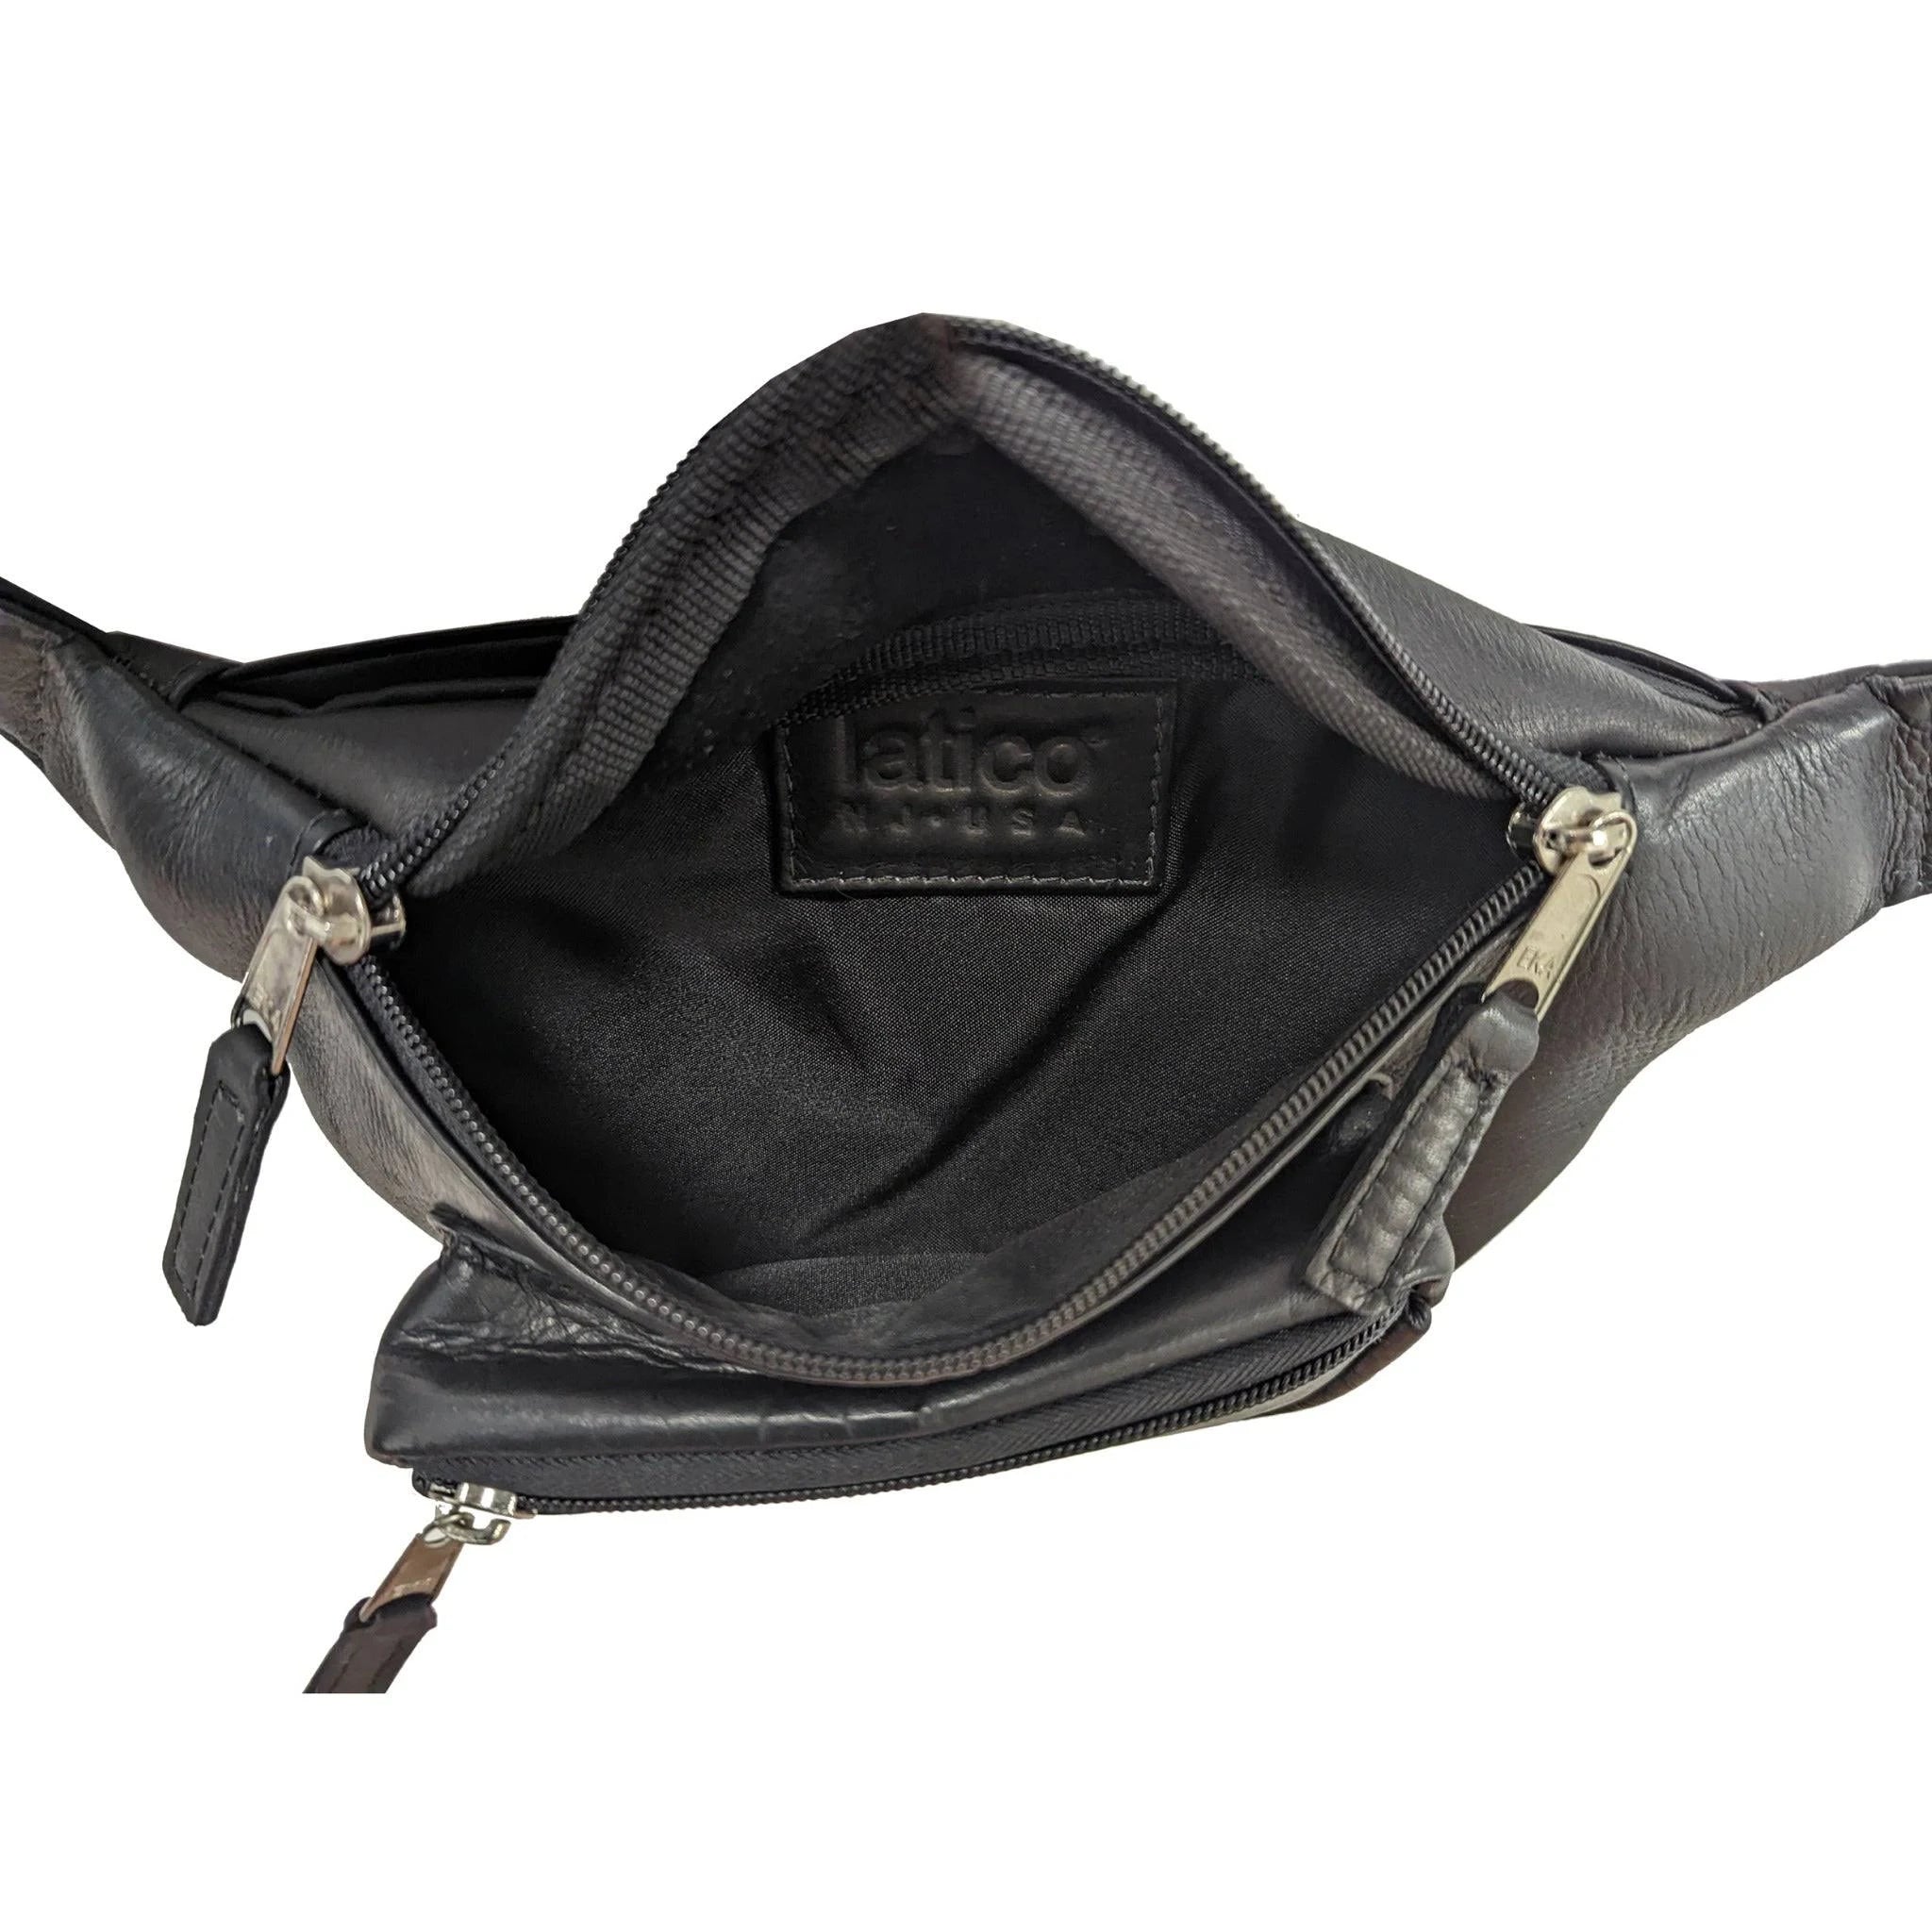 Leather heritage fanny pack/sling